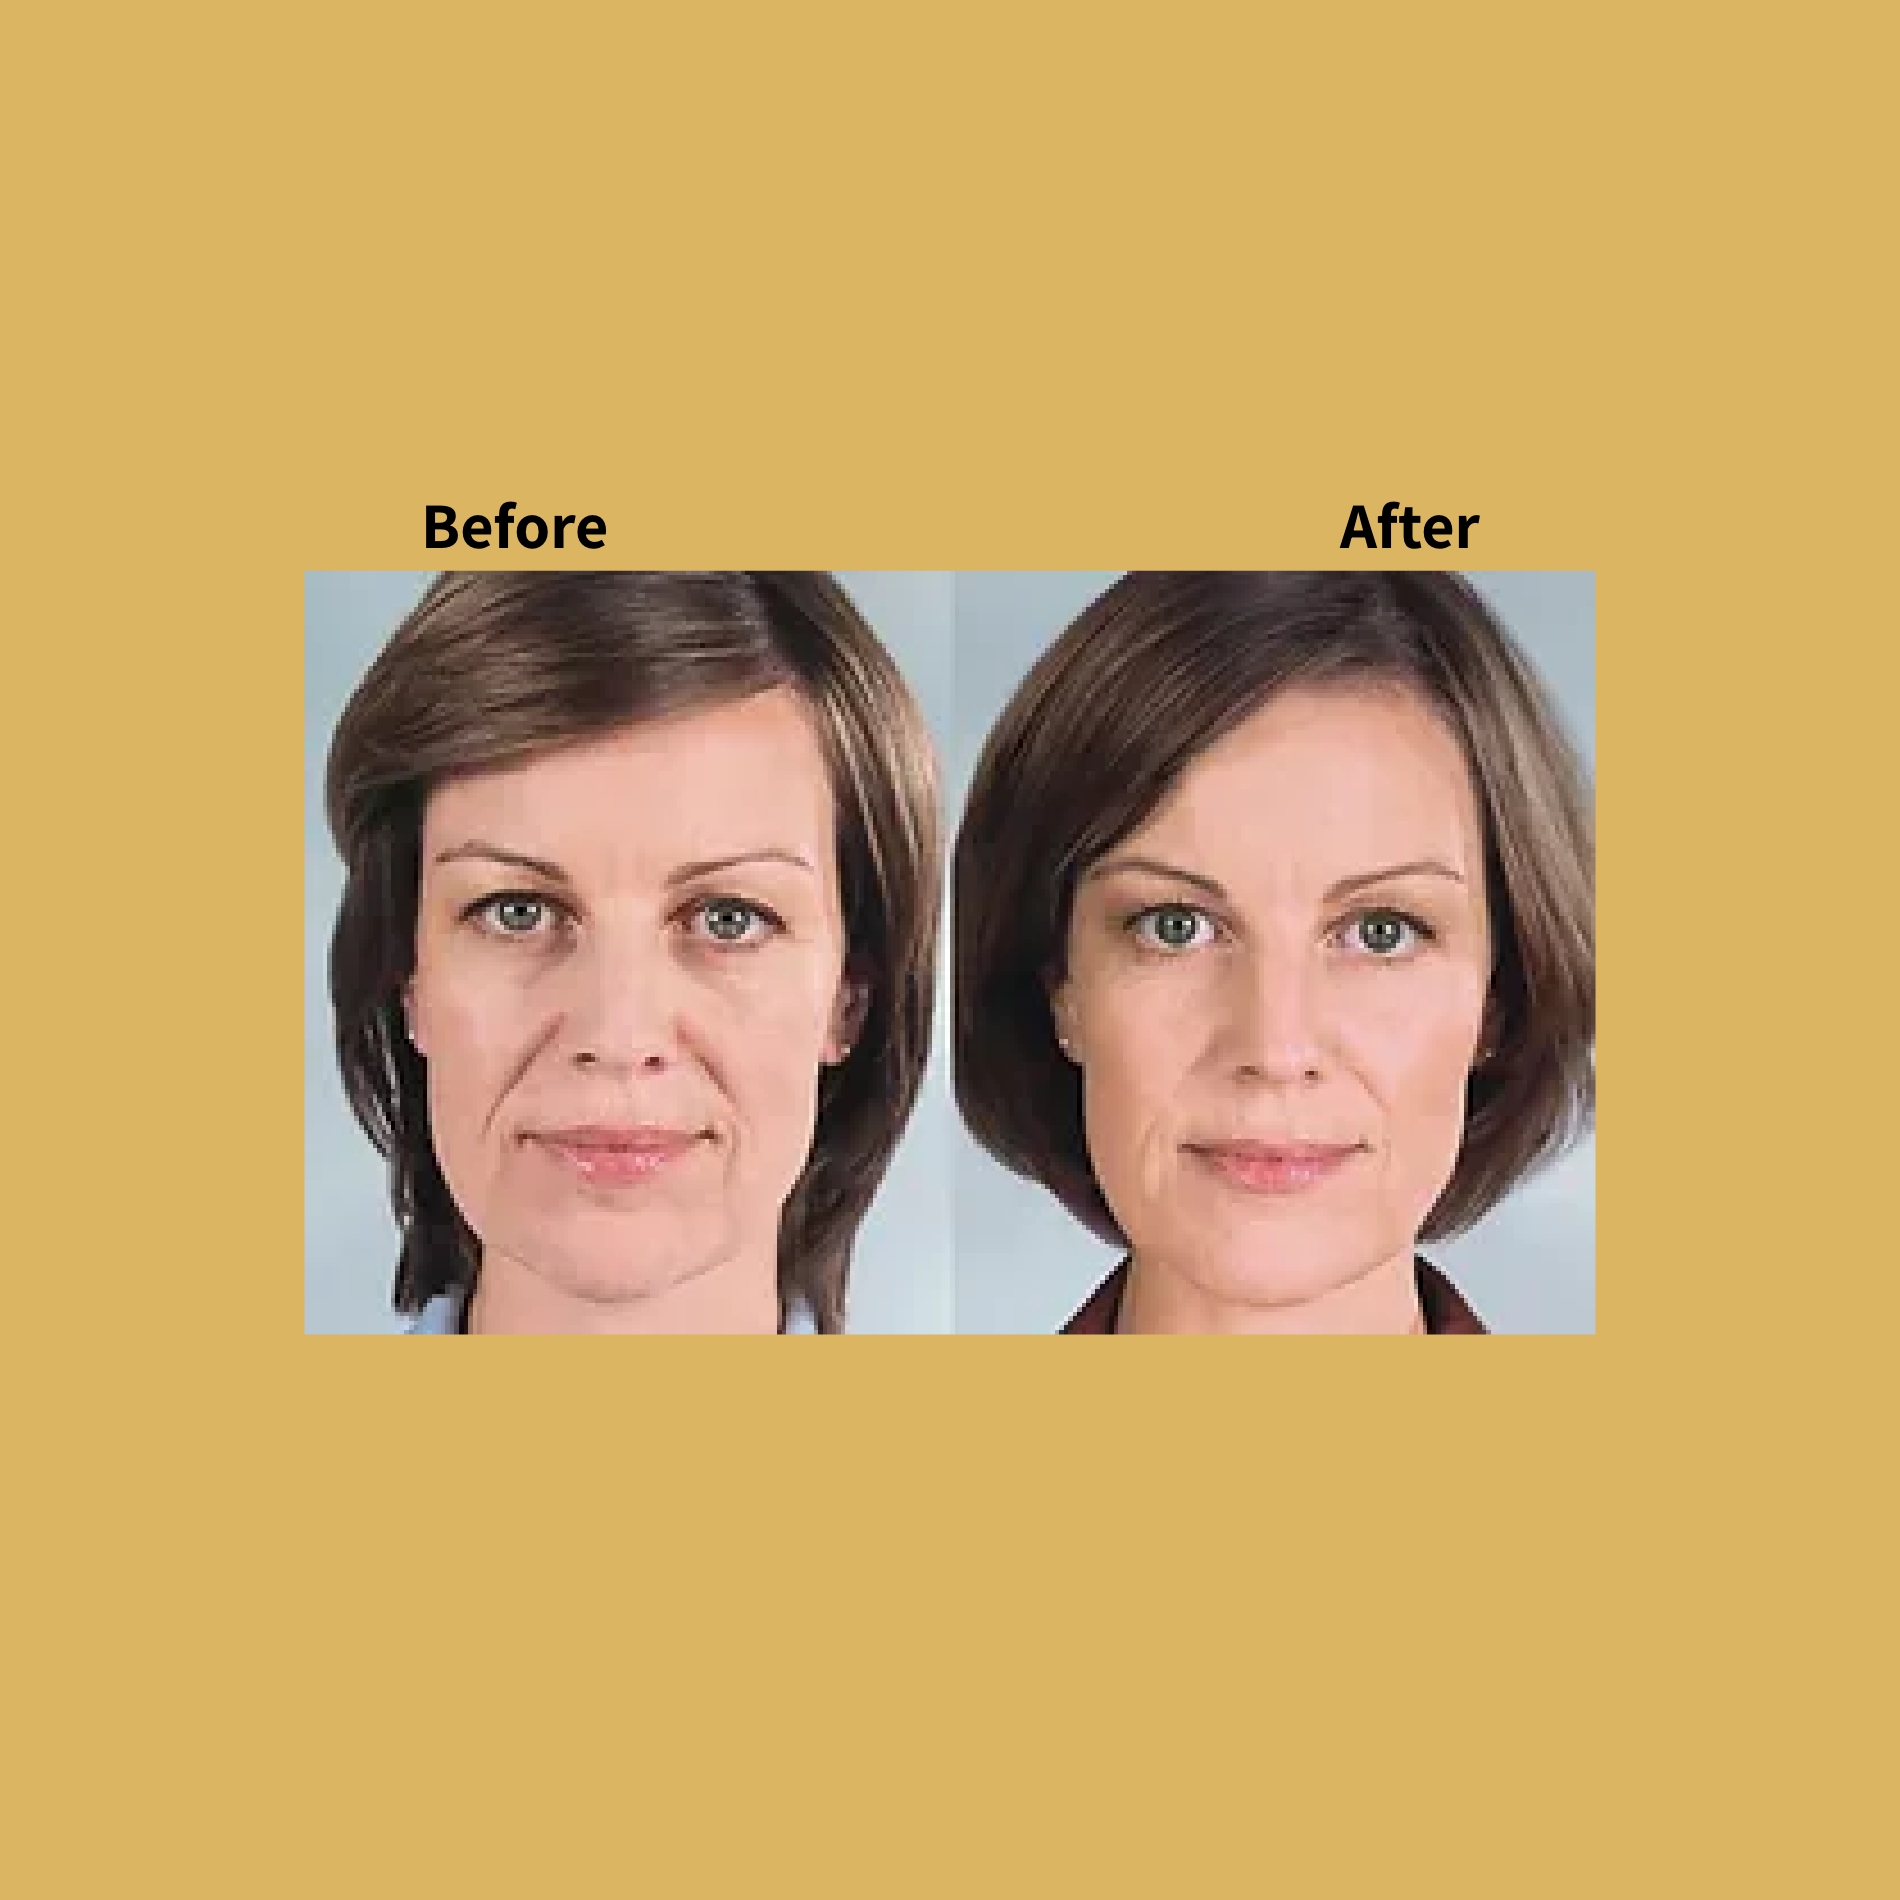 Secret RF Microneedling Treatment Before and After Photos | Soleil Medical & Beauty Spa in Portland, OR